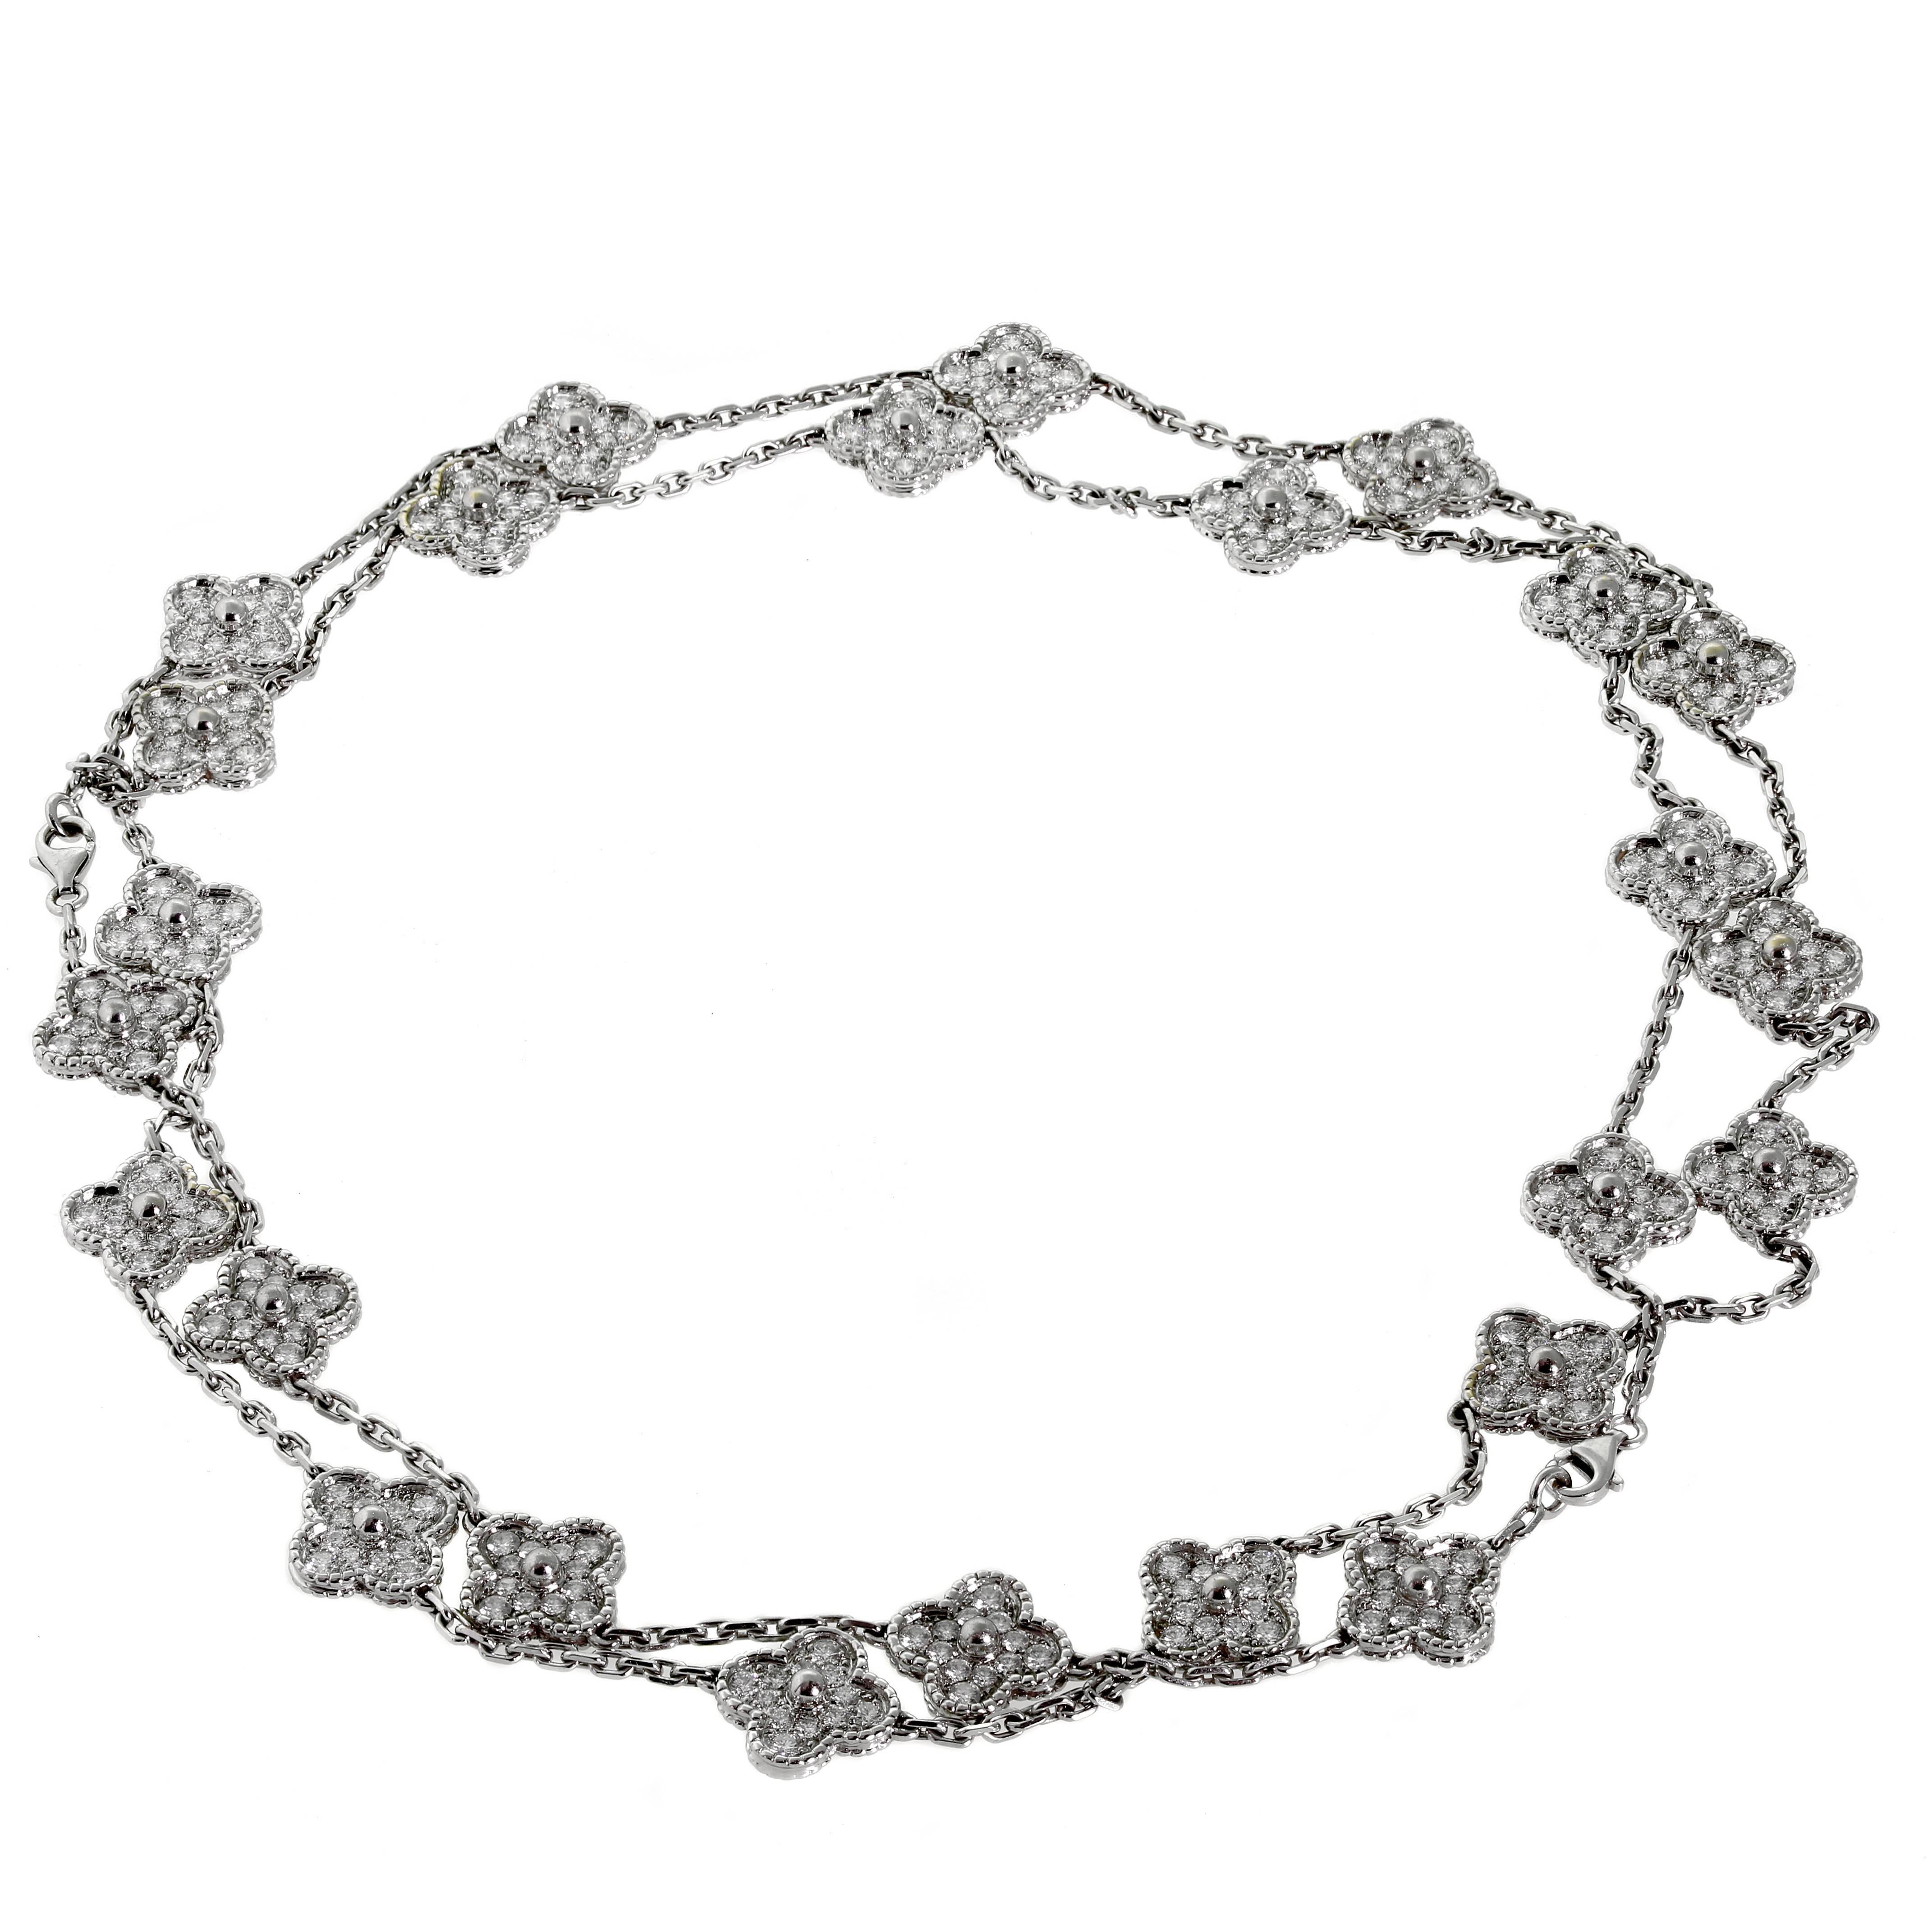 Van Cleef & Arpels 20 motif “Alhambra” diamond necklace set with 12.57 carats of DEF / IF-VVS diamonds total set in 18k white Gold, accompanied with a 5 motif diamond bracelet.

Necklace Length: 31.5″
Bracelet Length: 7.5″

Accessories: Van